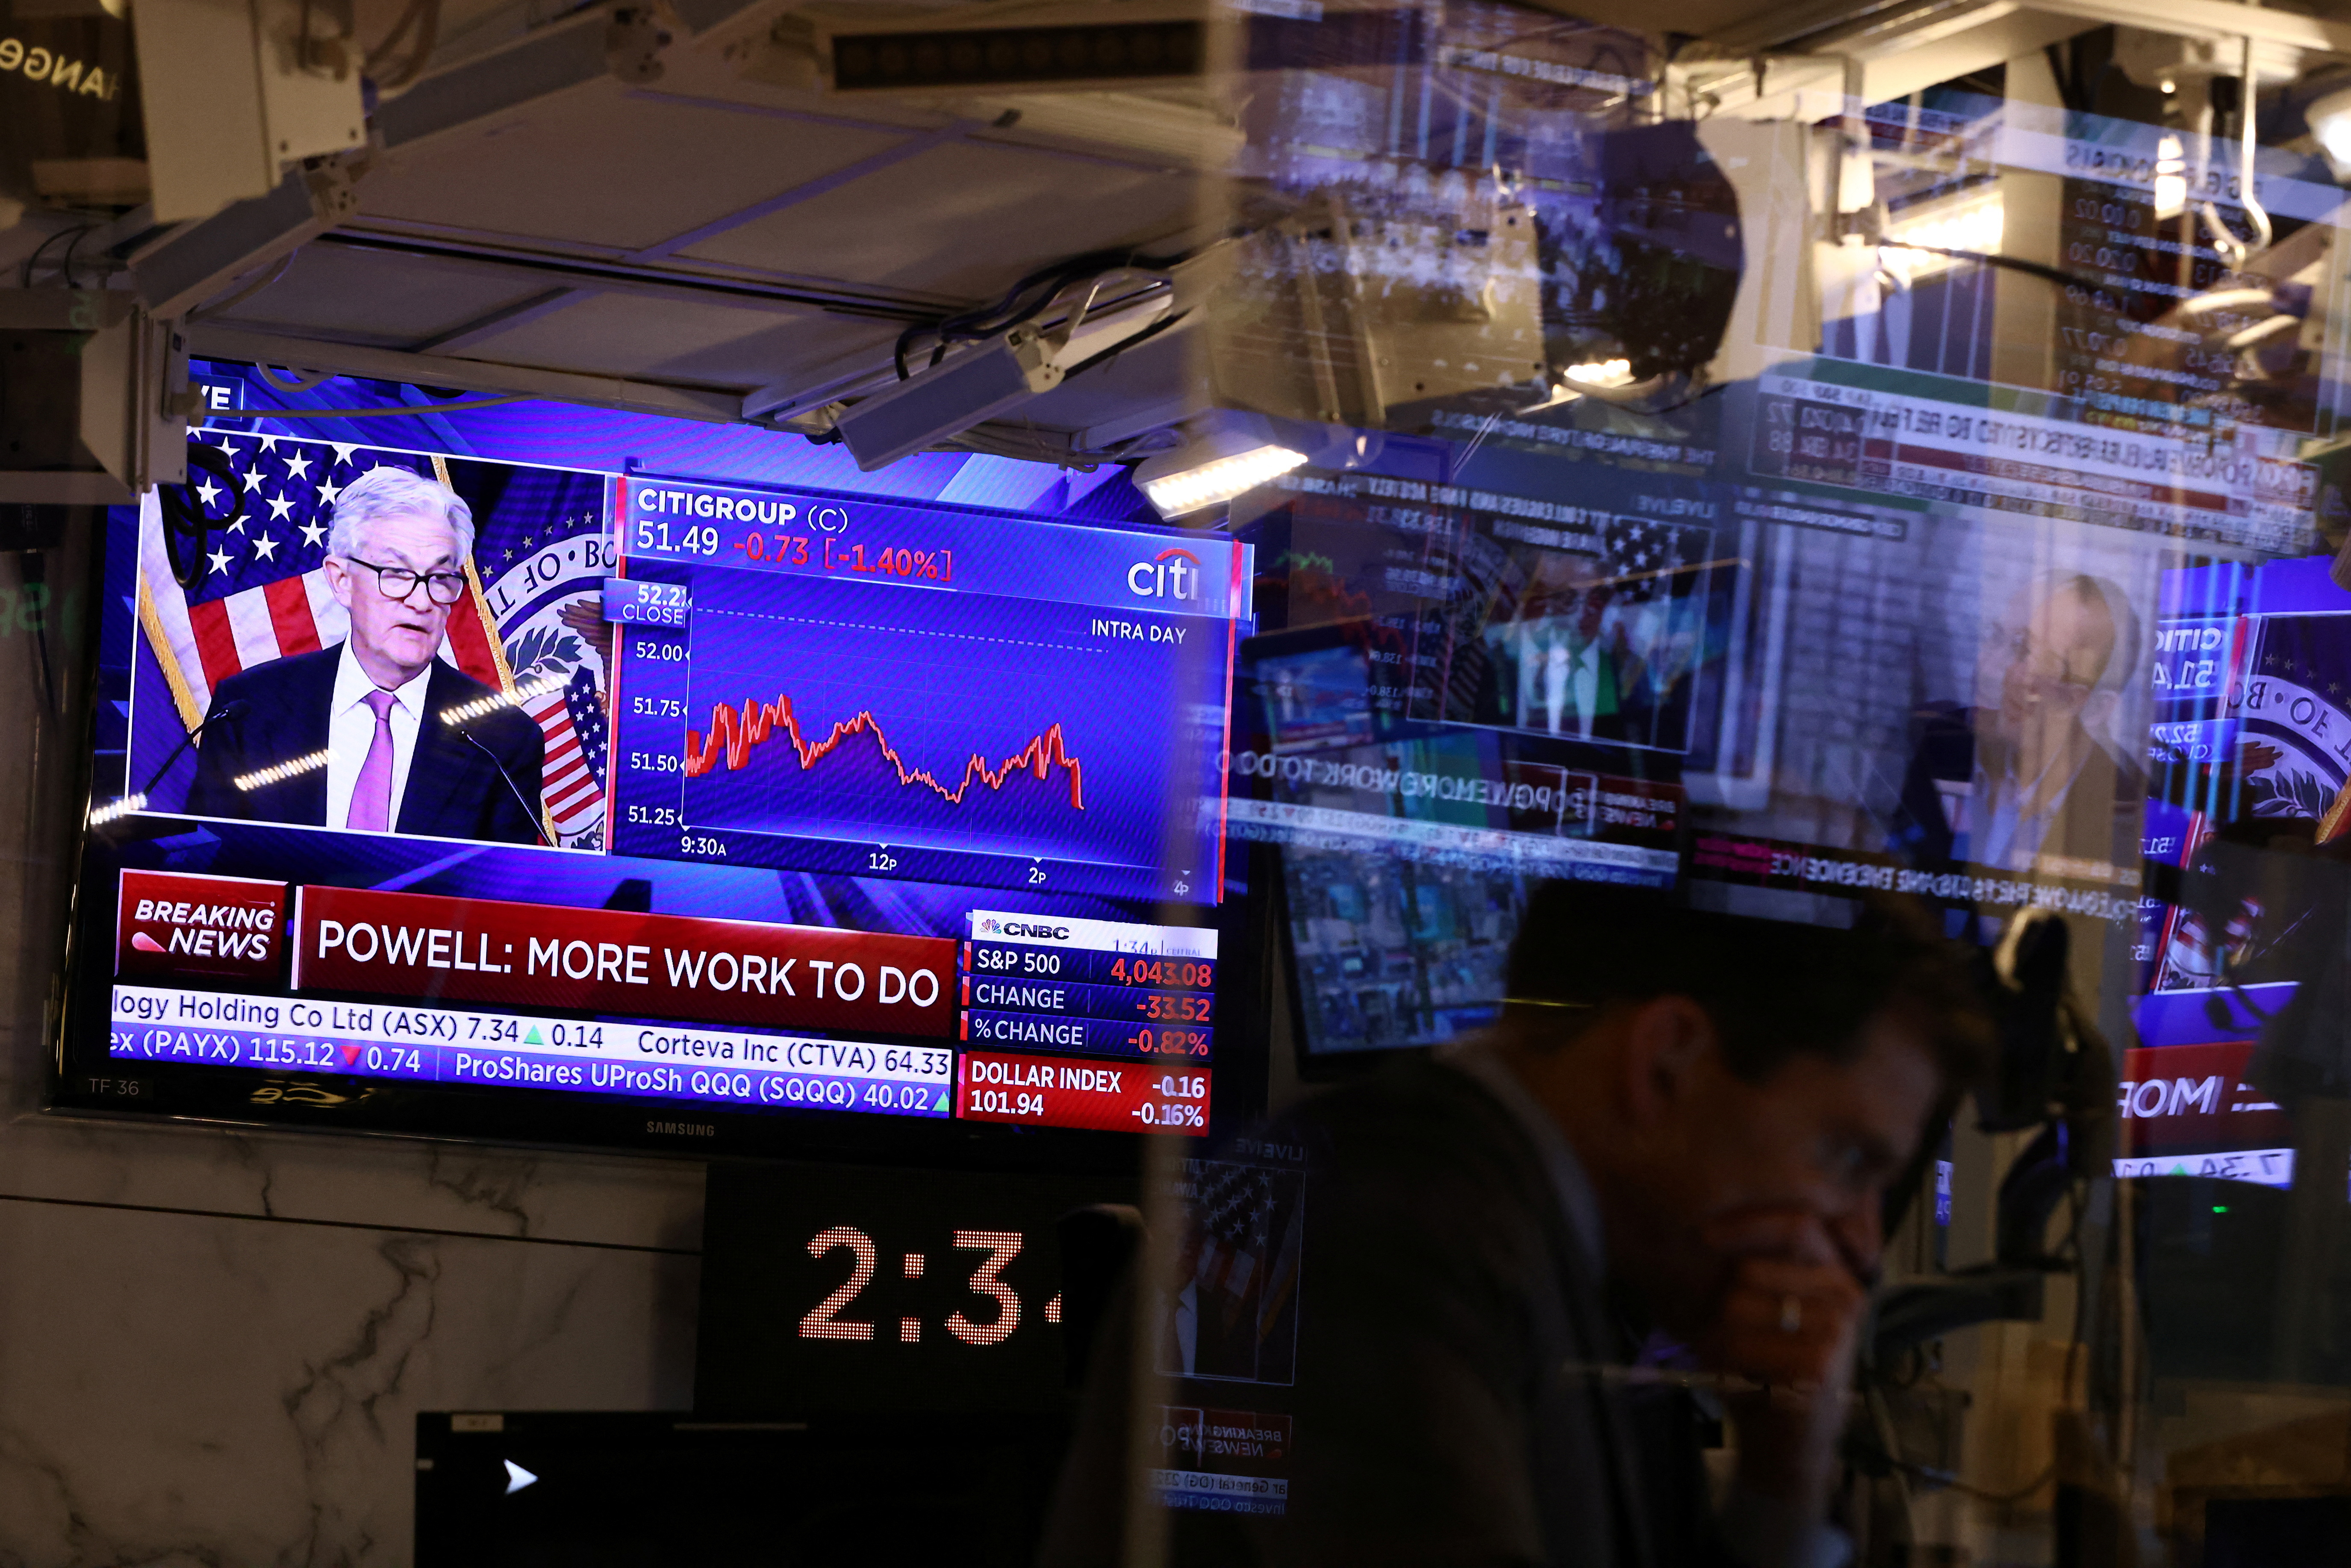 Federal Reserve Board Chairman Jerome Powell appears on a screen on the trading floor of the New York Stock Exchange (NYSE) during a news conference following a Fed rate announcement, in New York City, U.S., February 1, 2023. REUTERS/Andrew Kelly